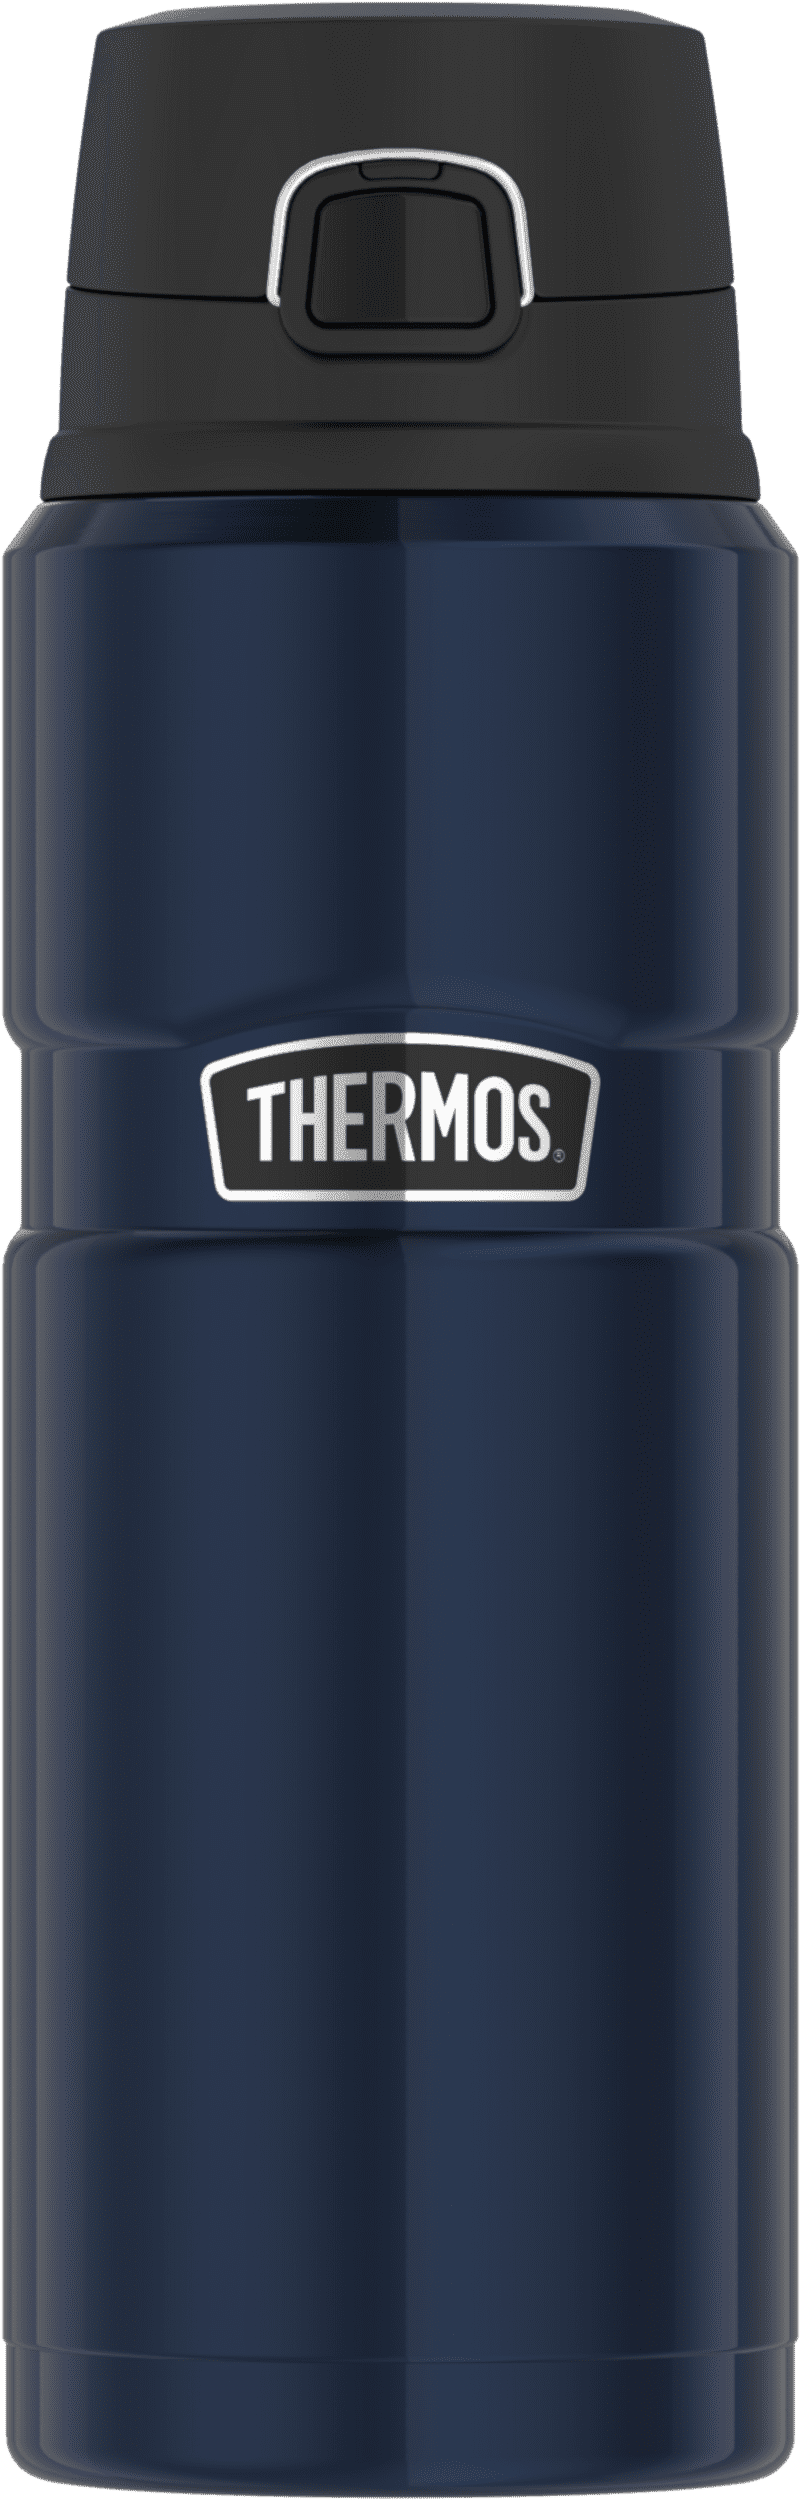 Thermos Isoliertrinkflasche Stainless King midnight blue 0,7l